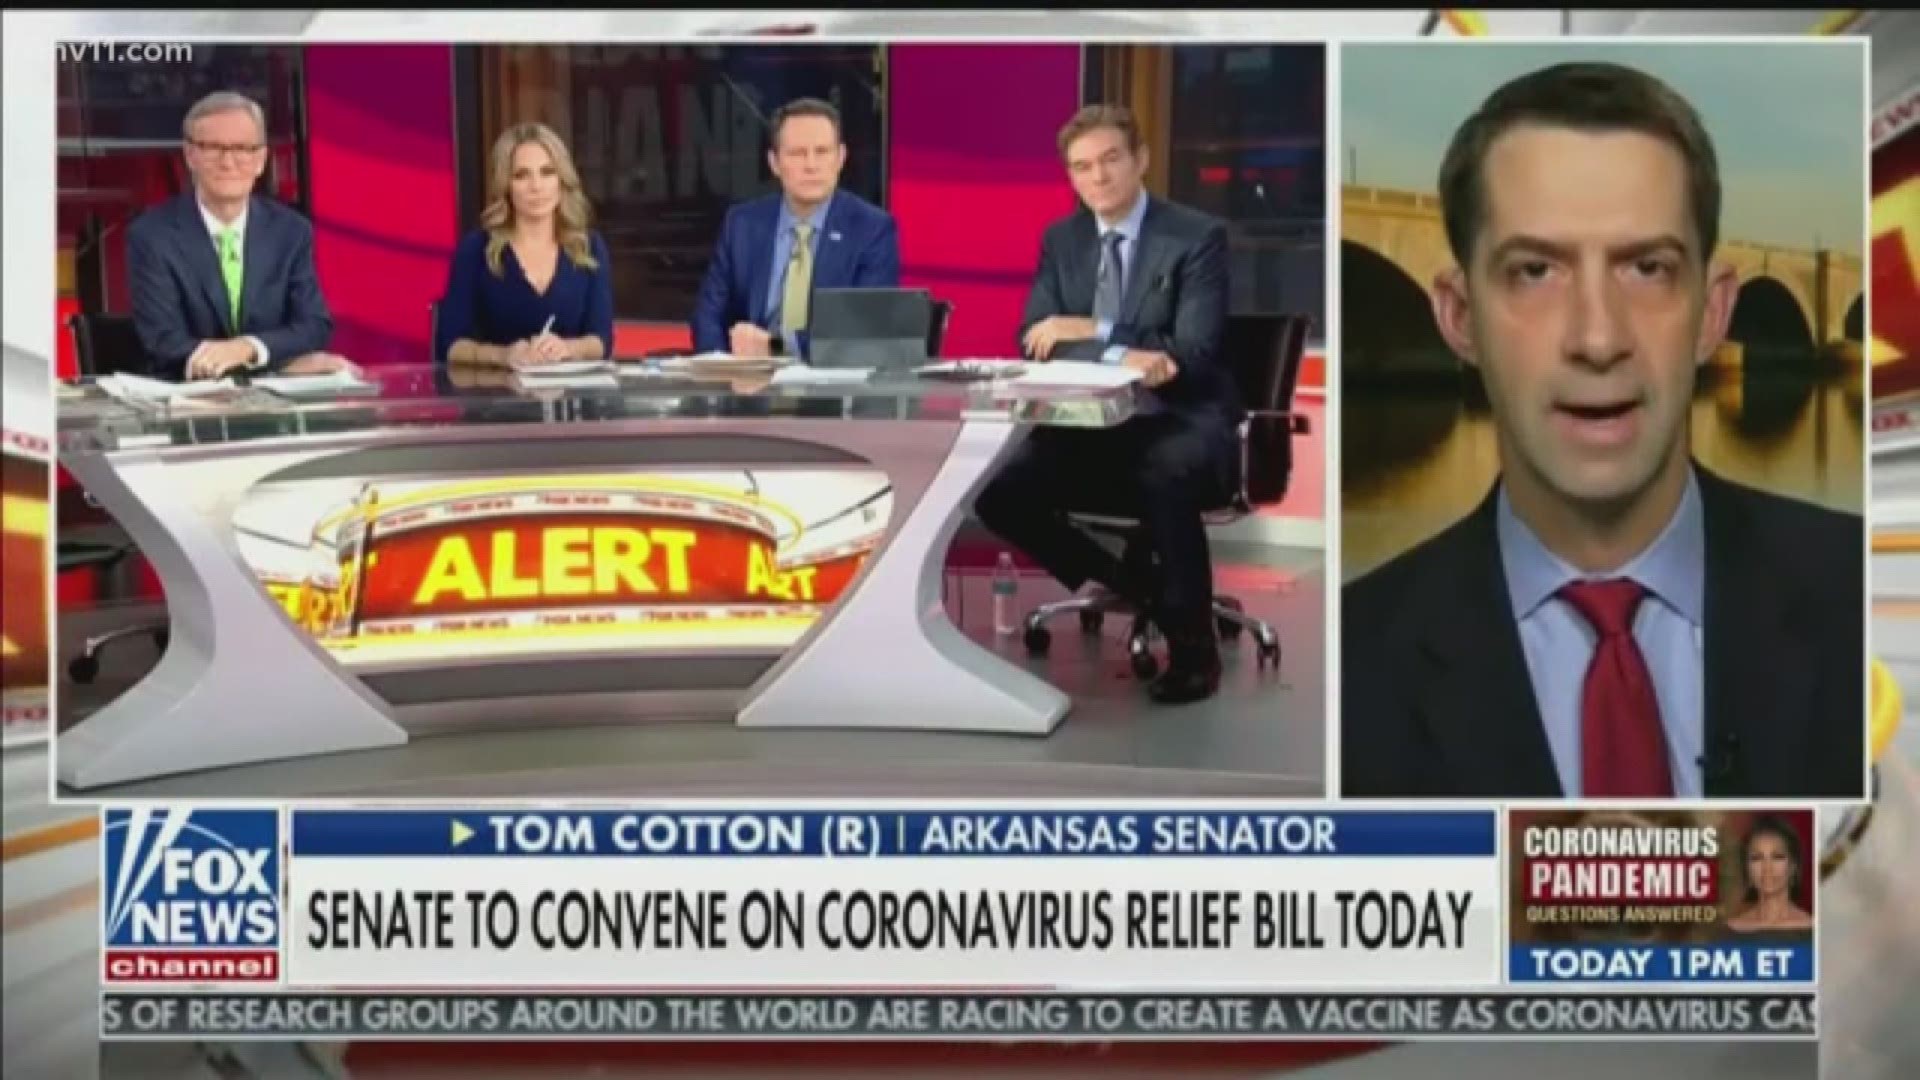 Sen. Tom Cotton mentioned proposed several steps that "may seem extreme today," but later they will be "obvious" in preventing further spread of COVID-19.